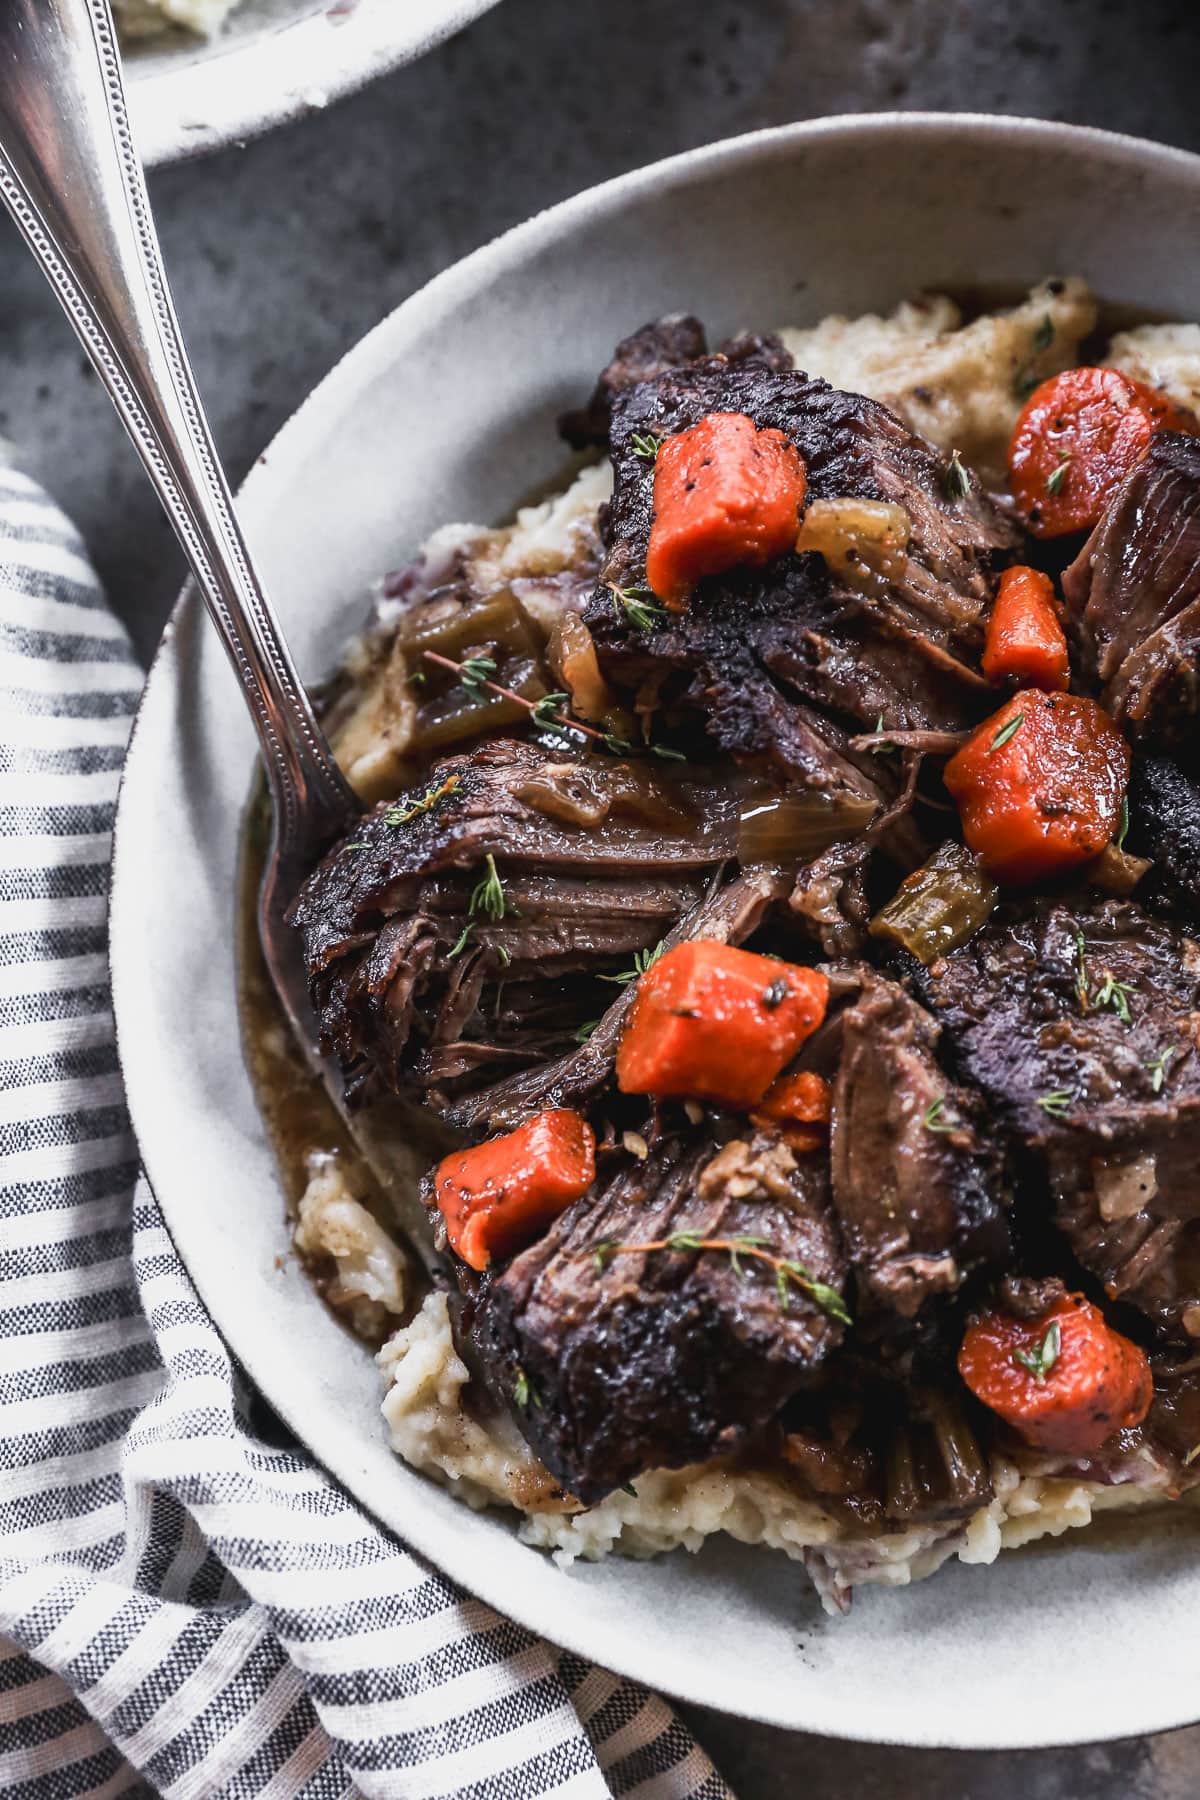 bowl of mashed potatoes topped with red wine braised beef